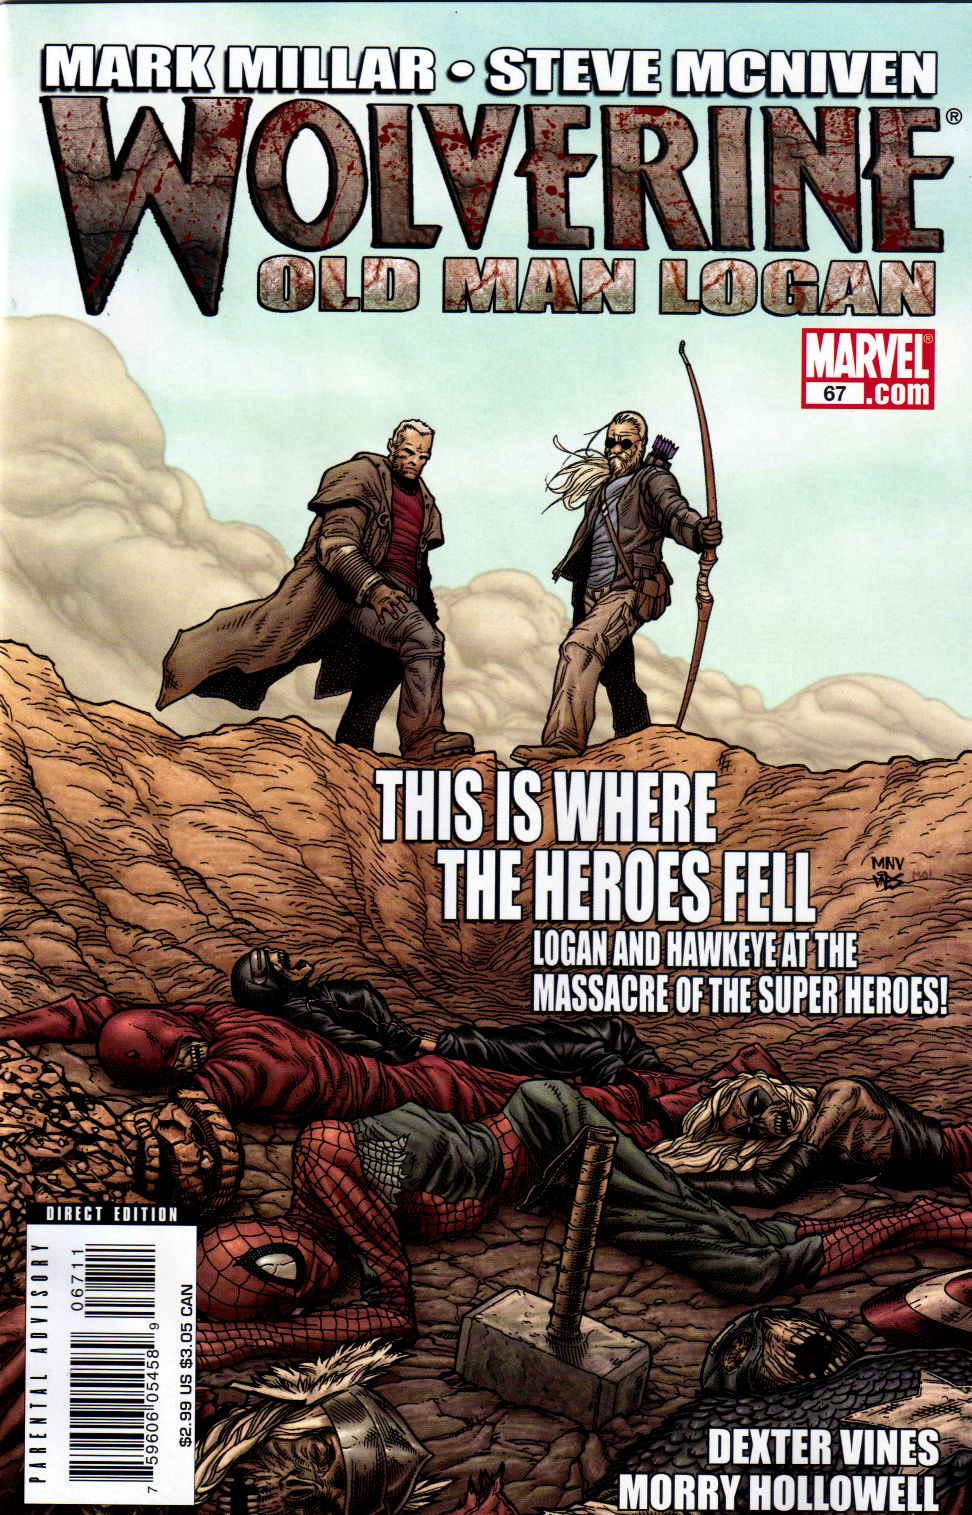 old man logan 67 - Mark Millar Steve Mcniven Wolverine Marvel Old Man Logan 67 .com This Is Where The Heroes Fell Logan And Hawkeye At The _MASSACRE Of The Super Heroes! Direct Edition 06711 Hosilot Minit 71159606054581 g $2.99 Us $3.05 Can Dexter Vines M